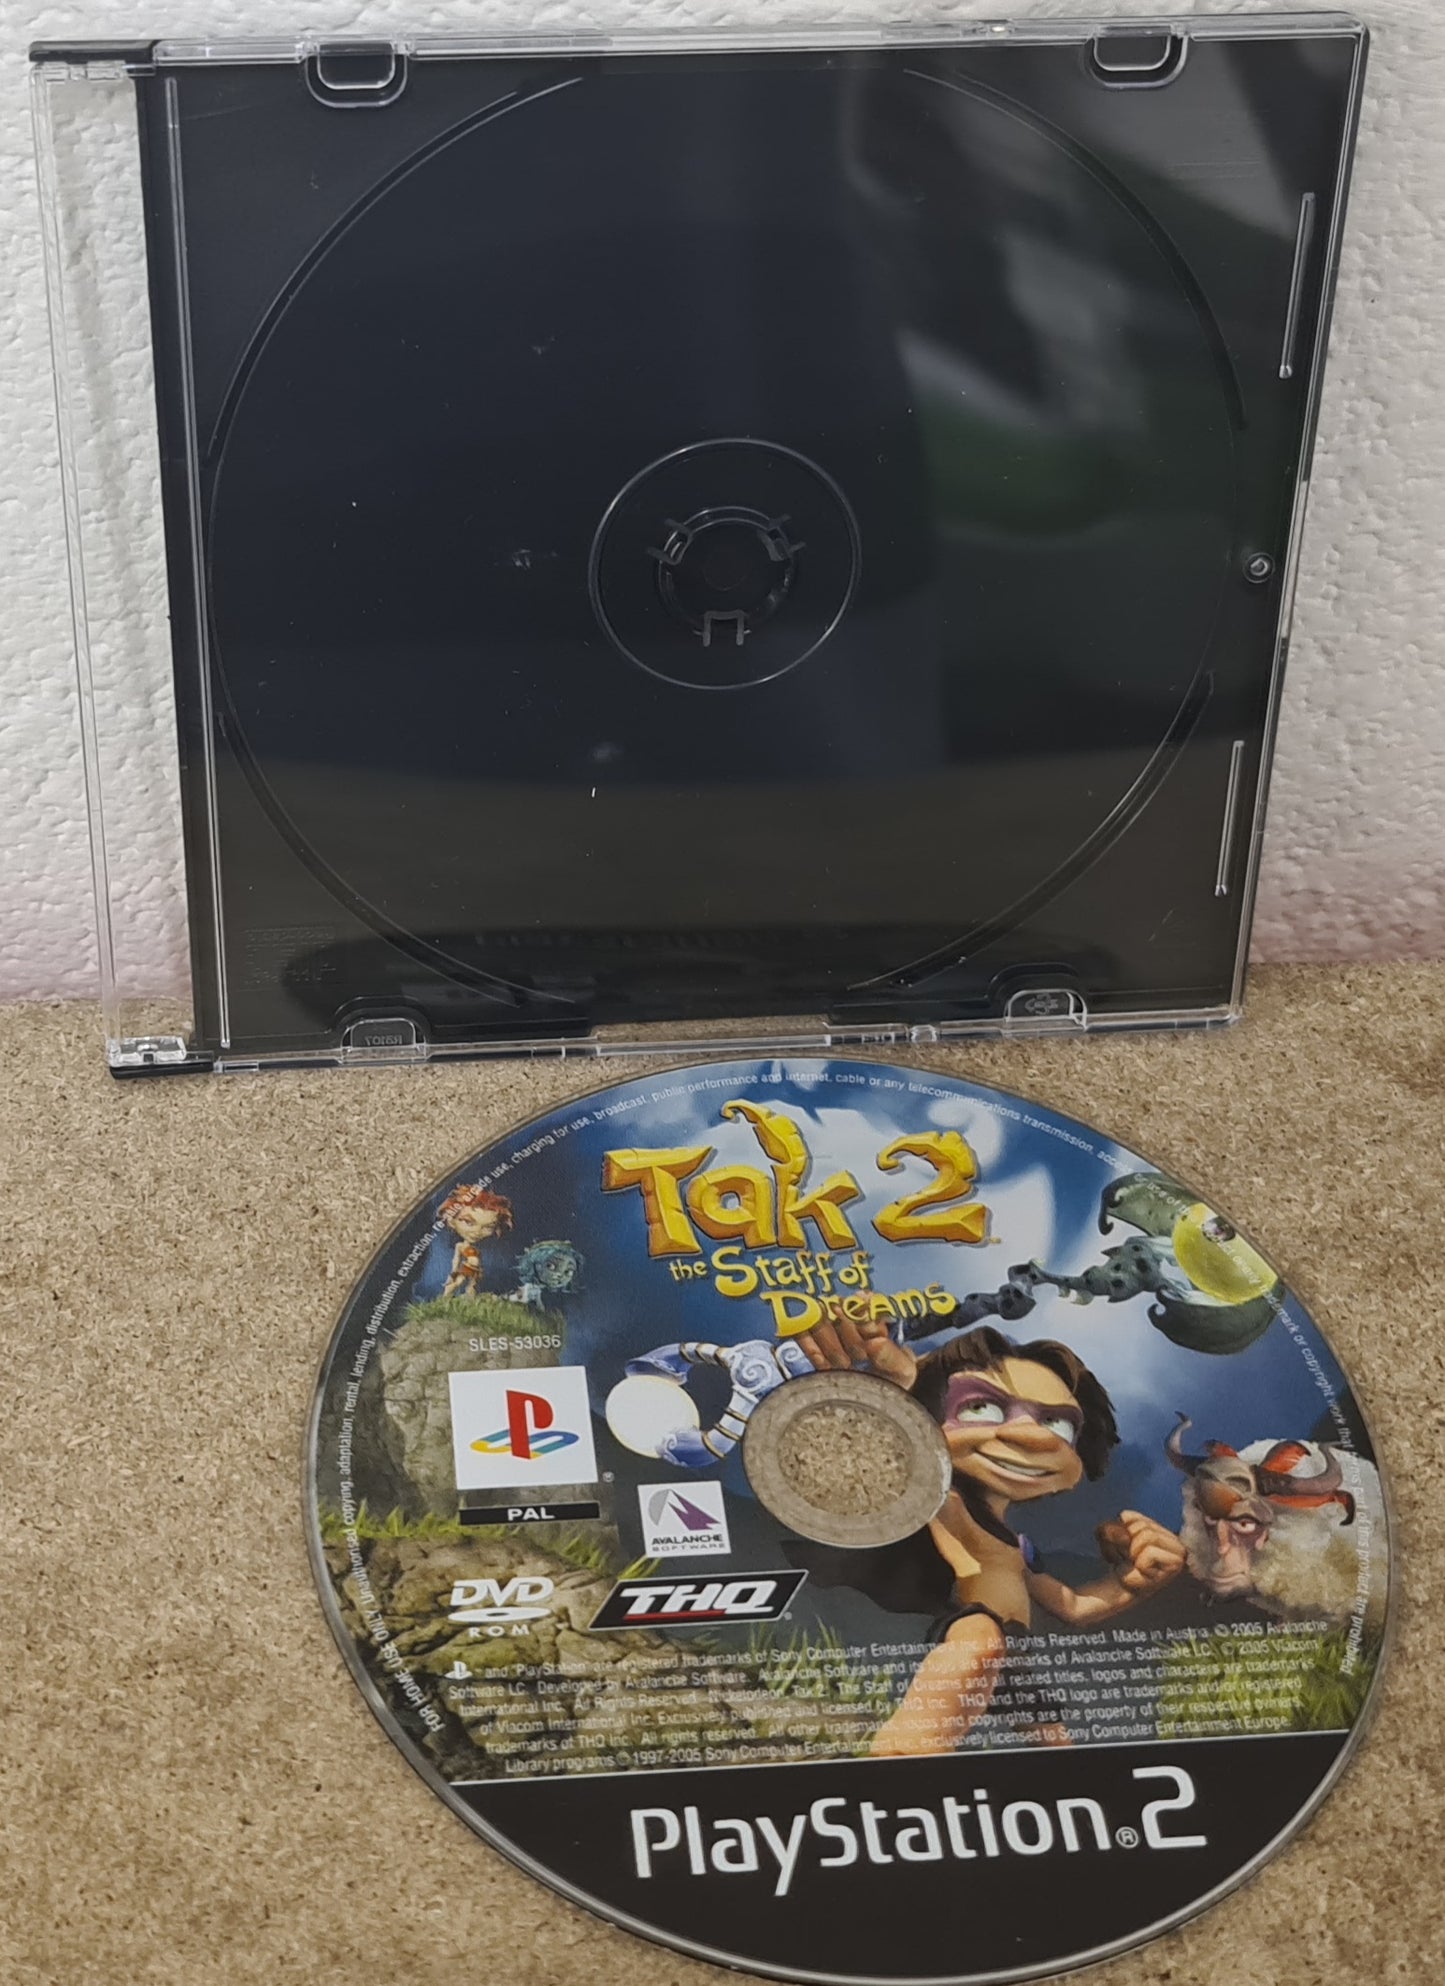 Tak 2 the Staff of Dreams Sony Playstation 2 (PS2) Game Disc Only